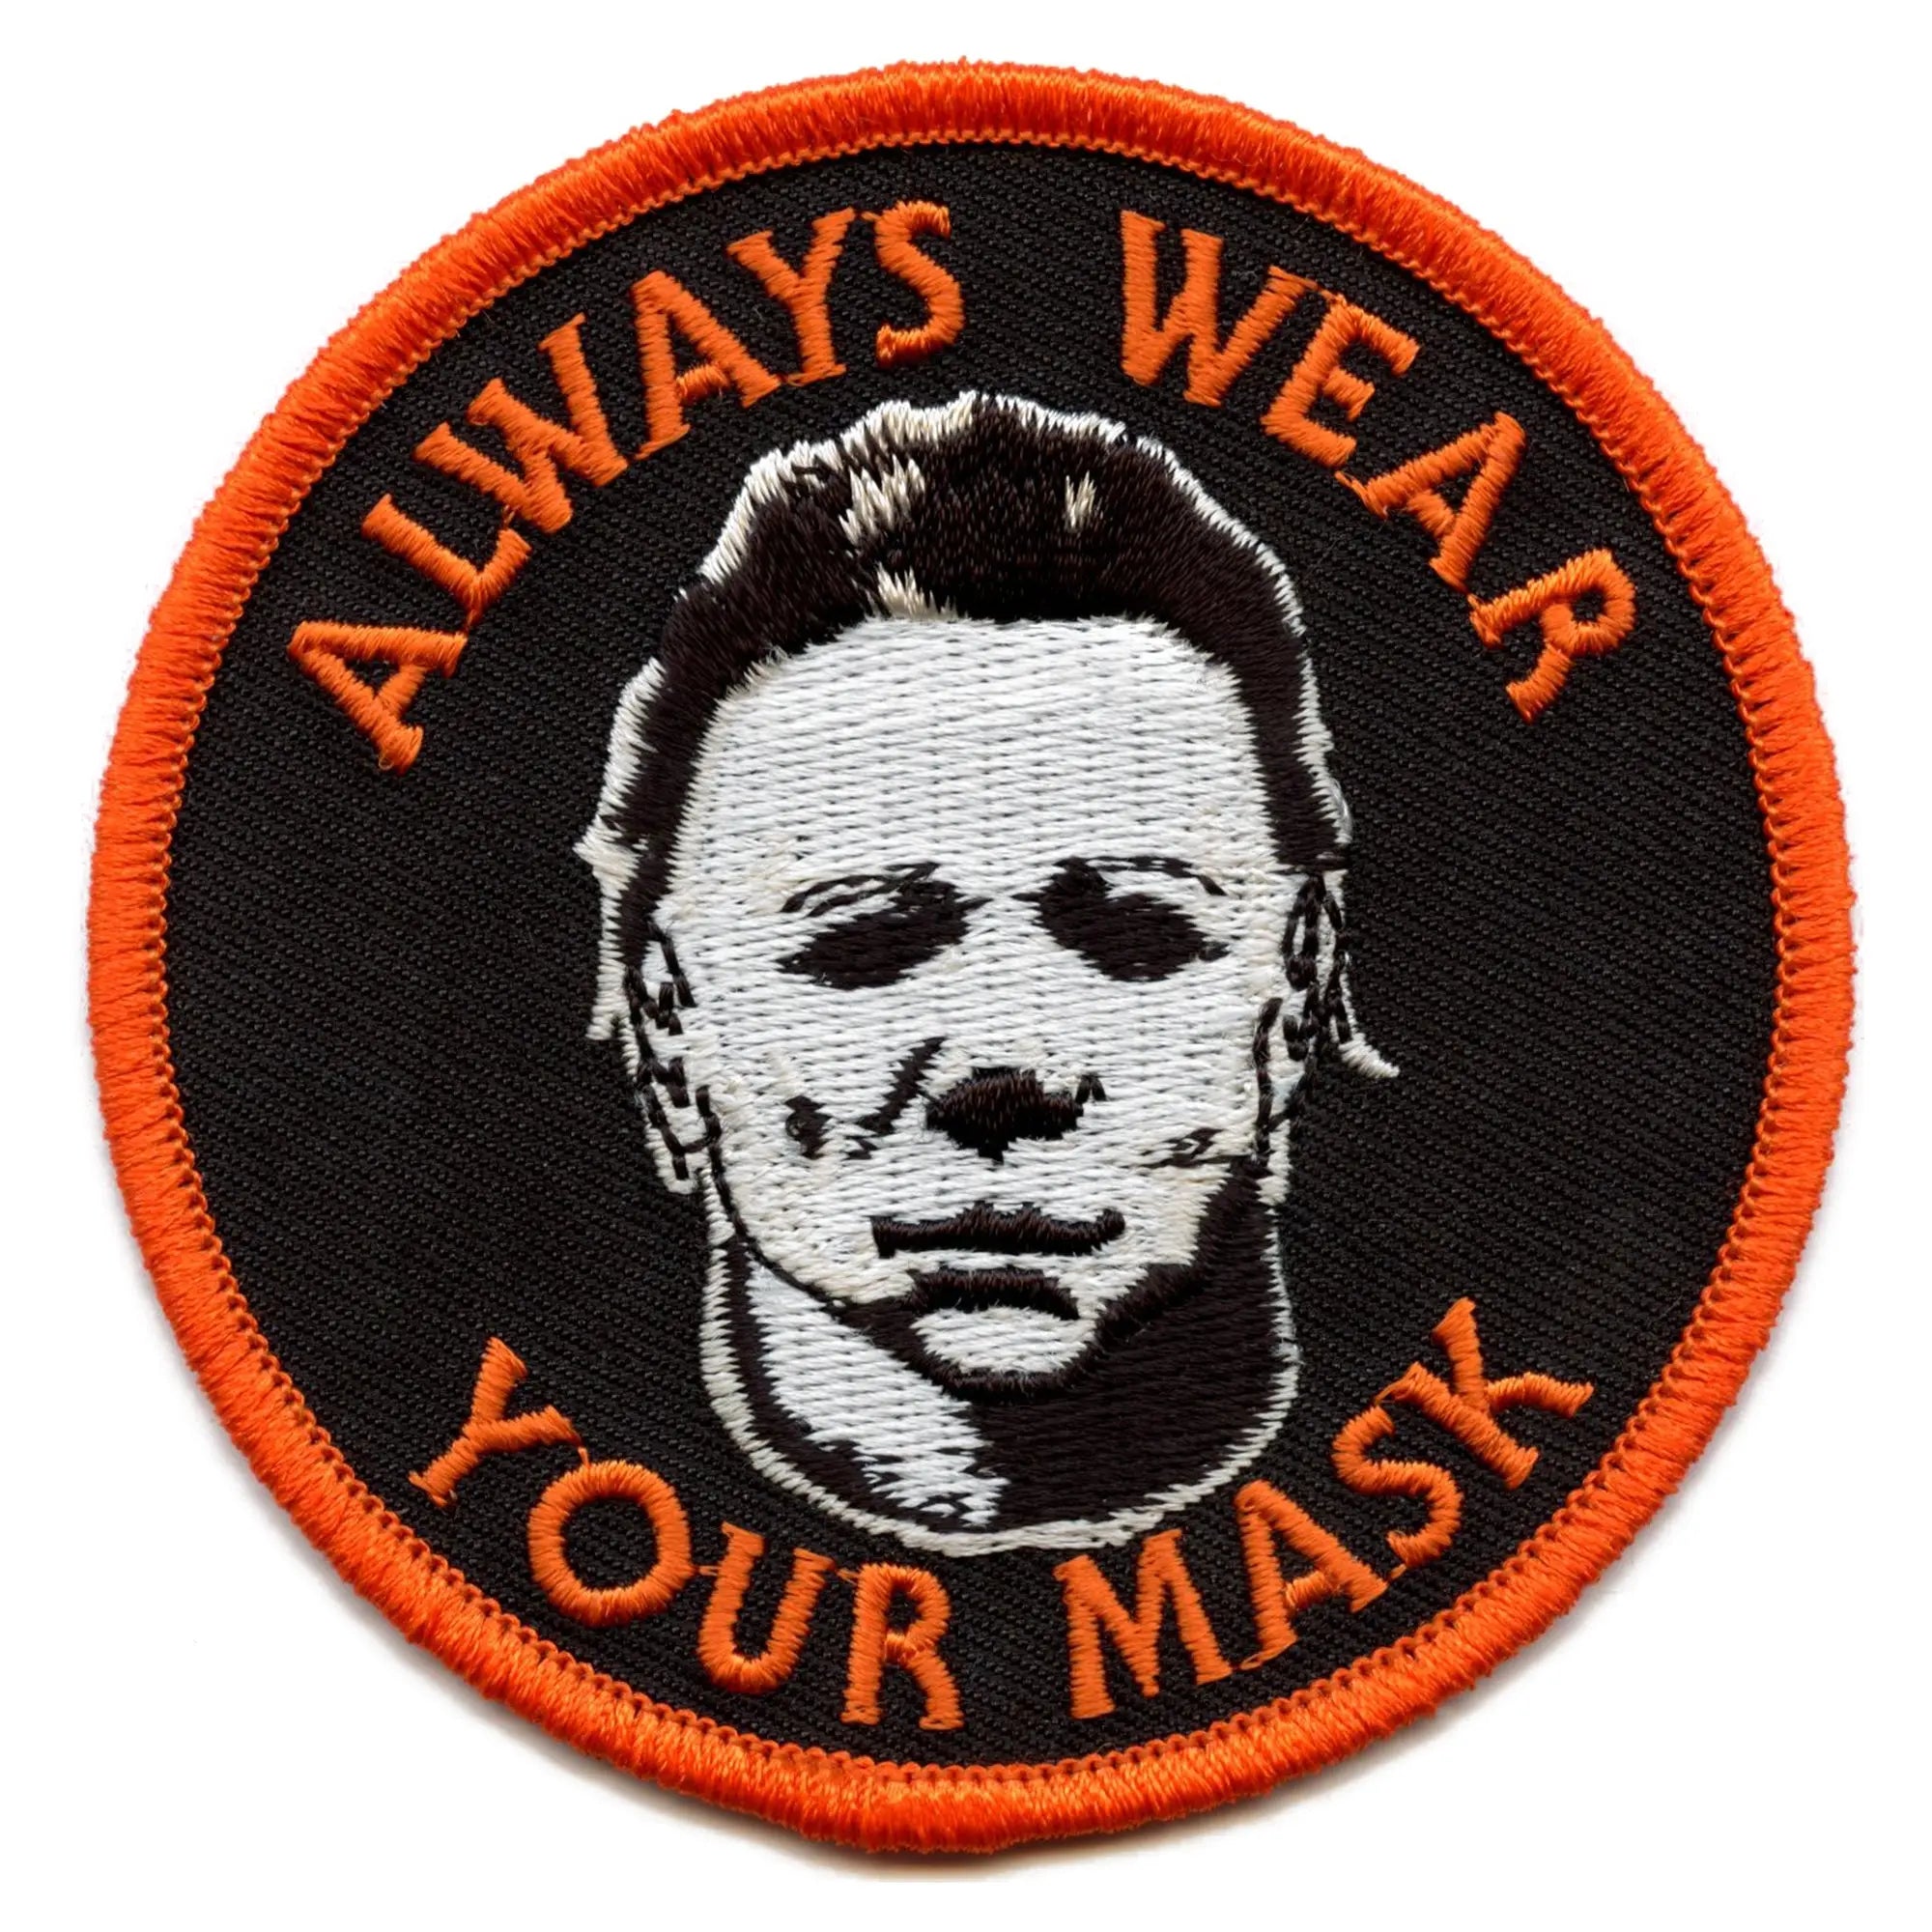 ➤ Iron on Patch Myers Halloween | Large iron on patch for jacket